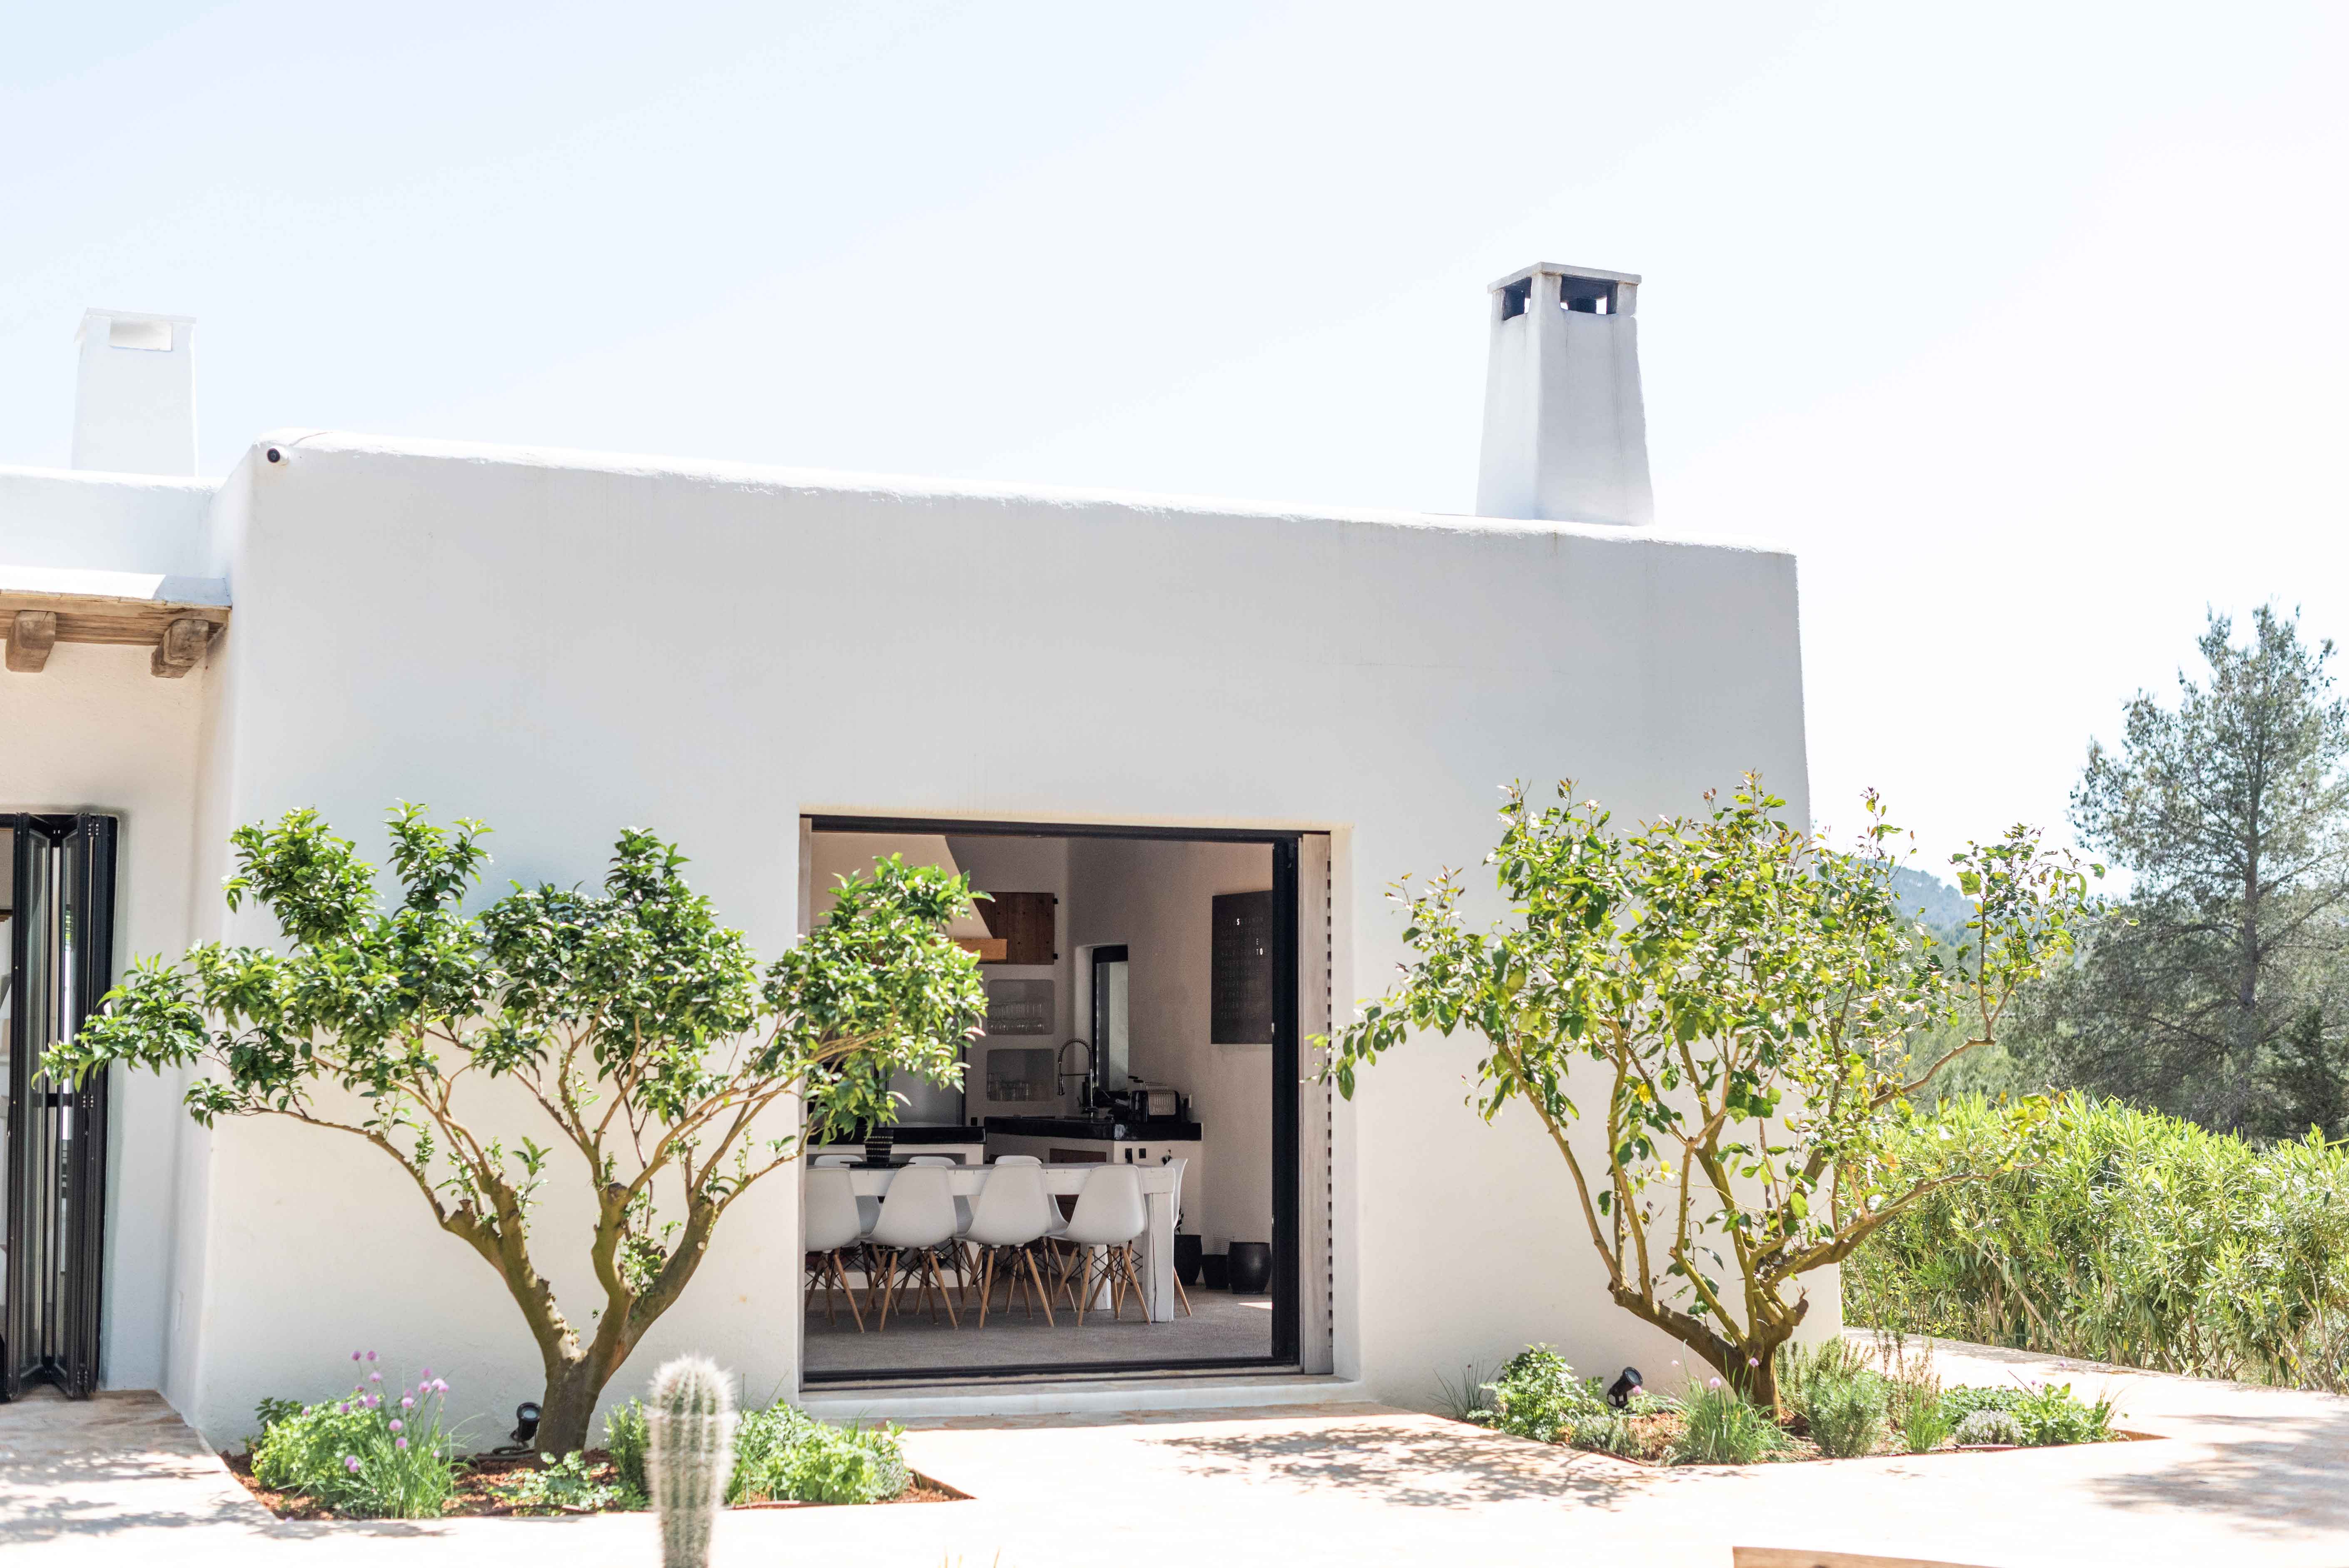 Luxury villas for family holidays | Can Payo, Ibiza | Mr & Mrs Smith Editorial 